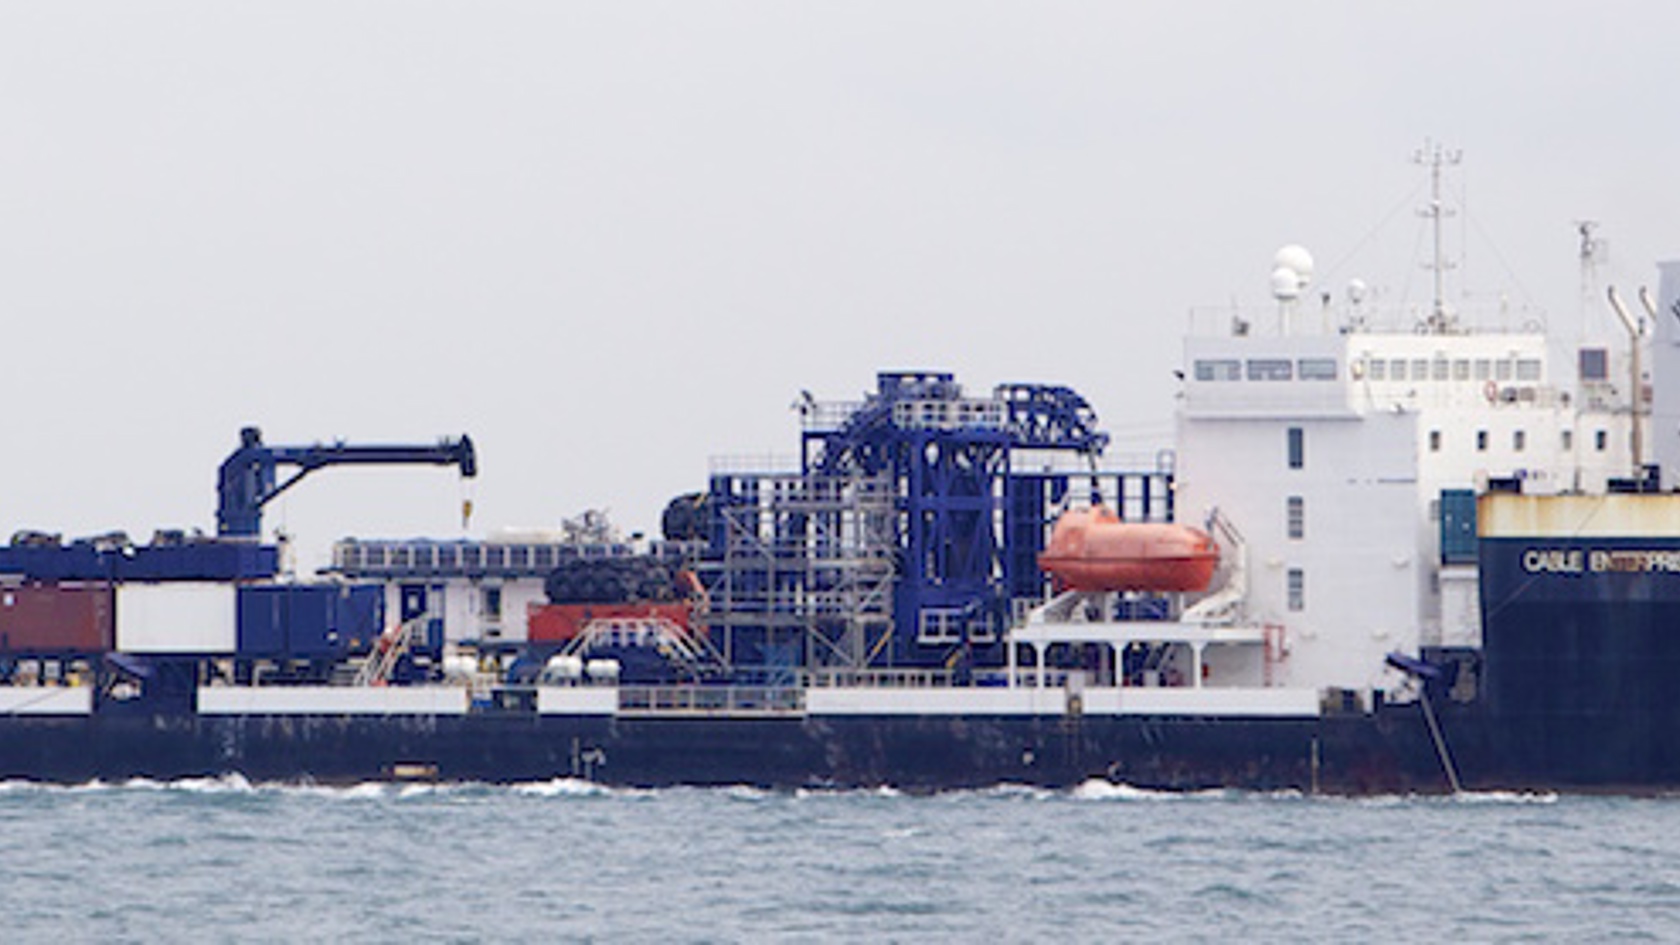 Ship carrying the Normandie 3 subsea cable